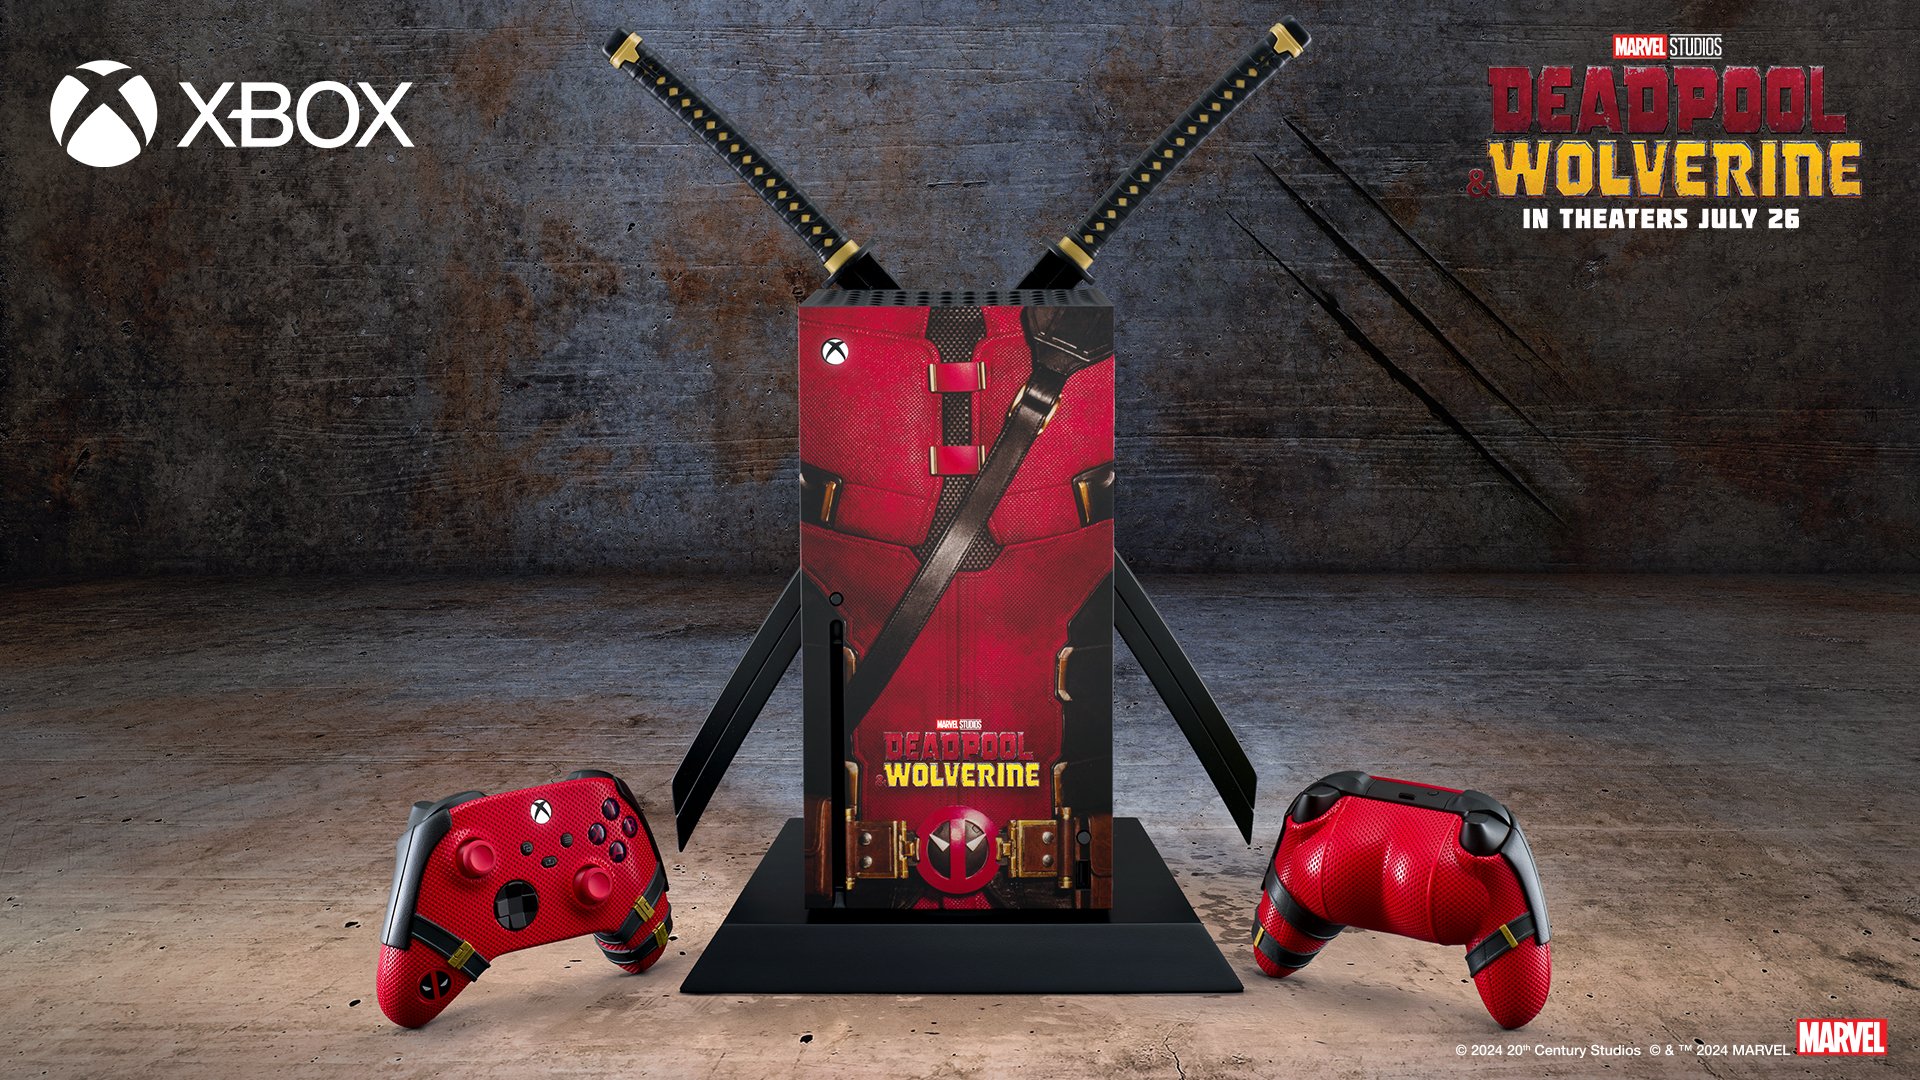 The Deadpool and Wolverine special edition Xbox Series X and controller